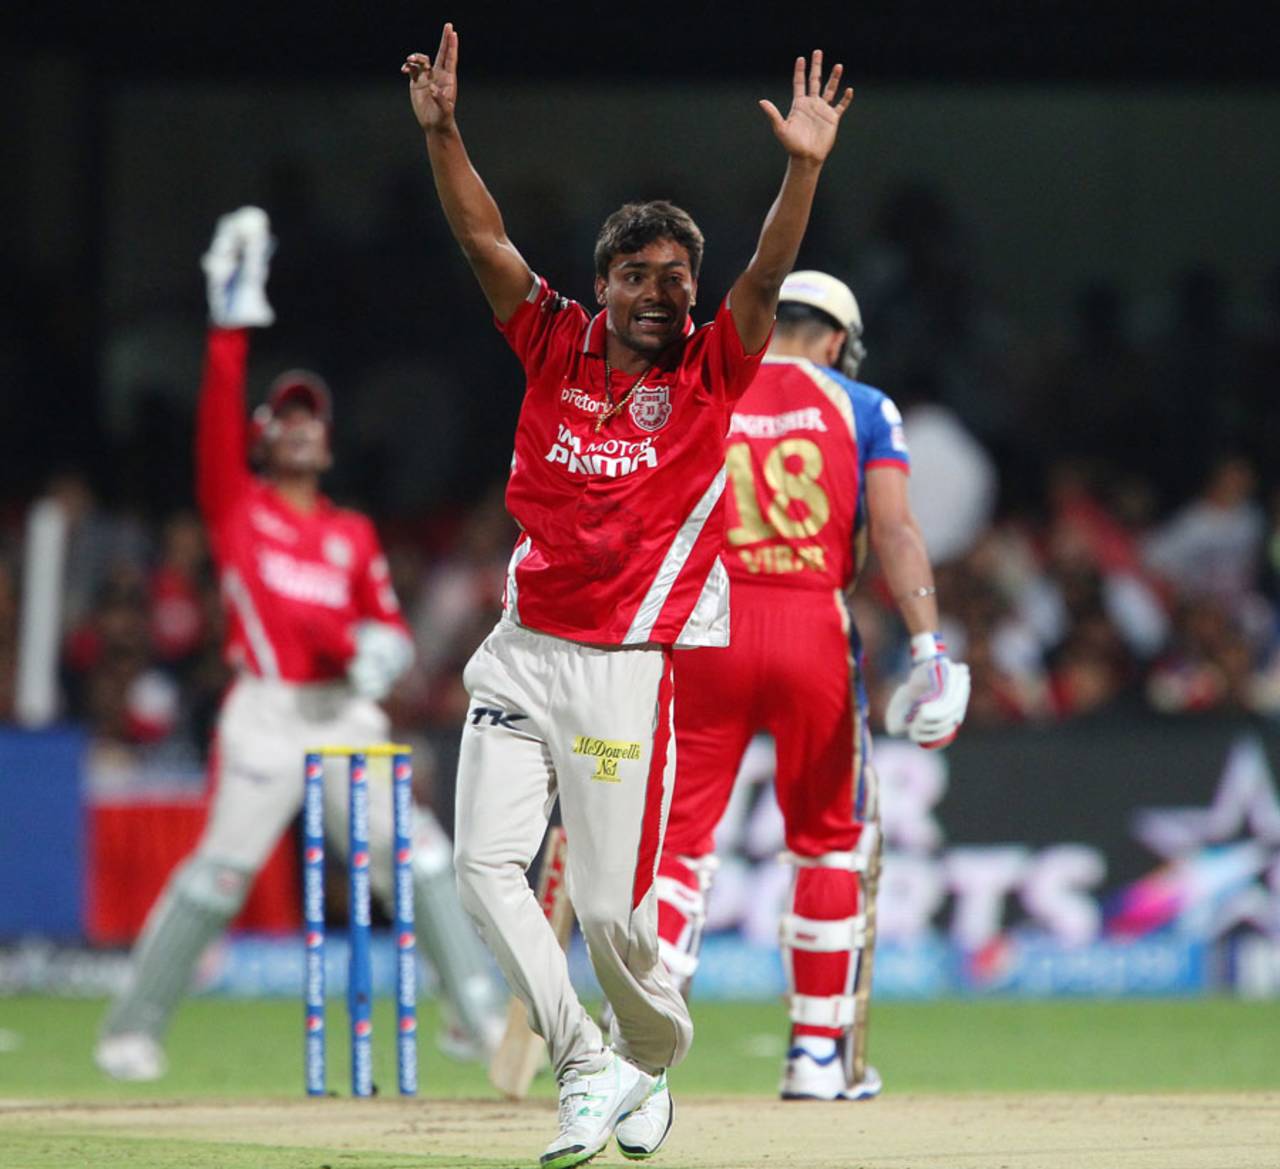 Sandeep Sharma also made a mark in the IPL, finishing as the highest wicket-taker for Kings XI Punjab in 2014&nbsp;&nbsp;&bull;&nbsp;&nbsp;BCCI